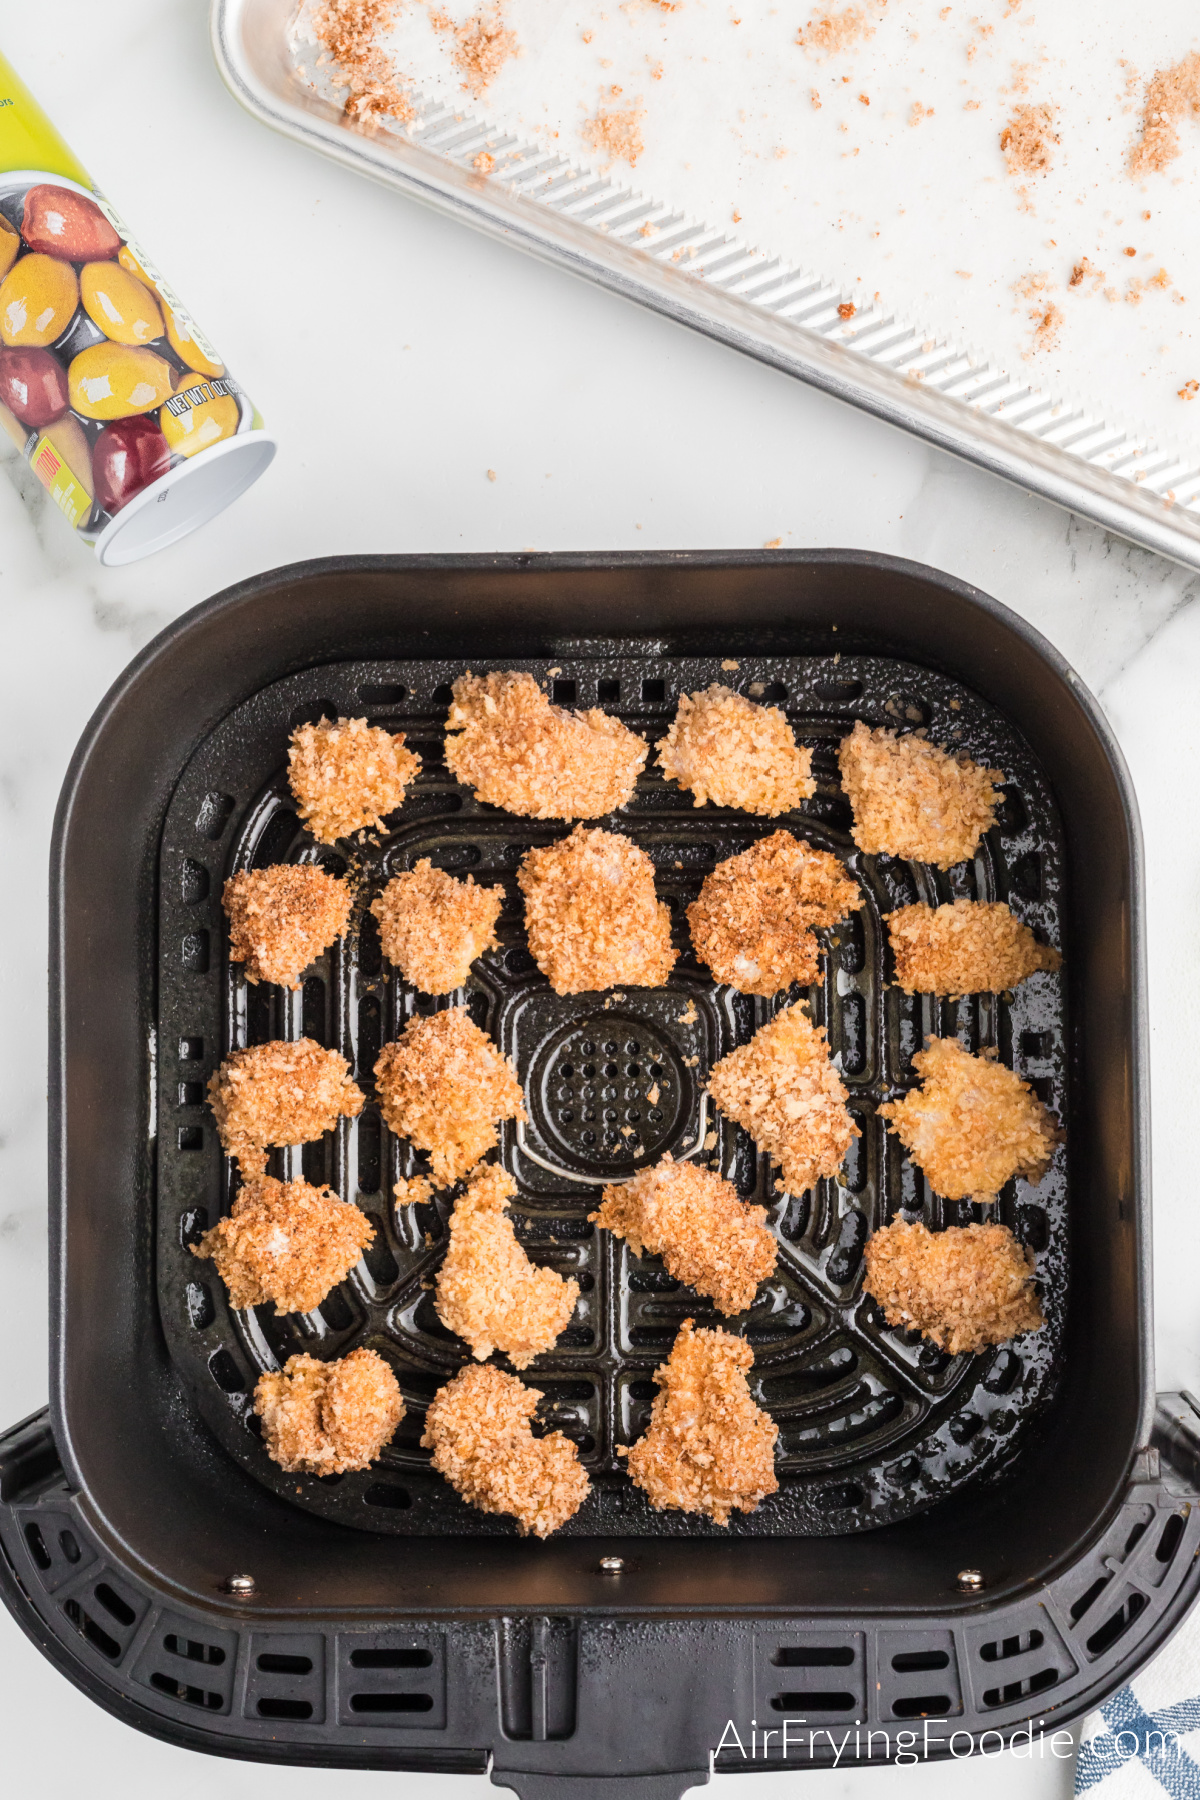 breaded and seasoned popcorn chicken in the basket of the air fryer.